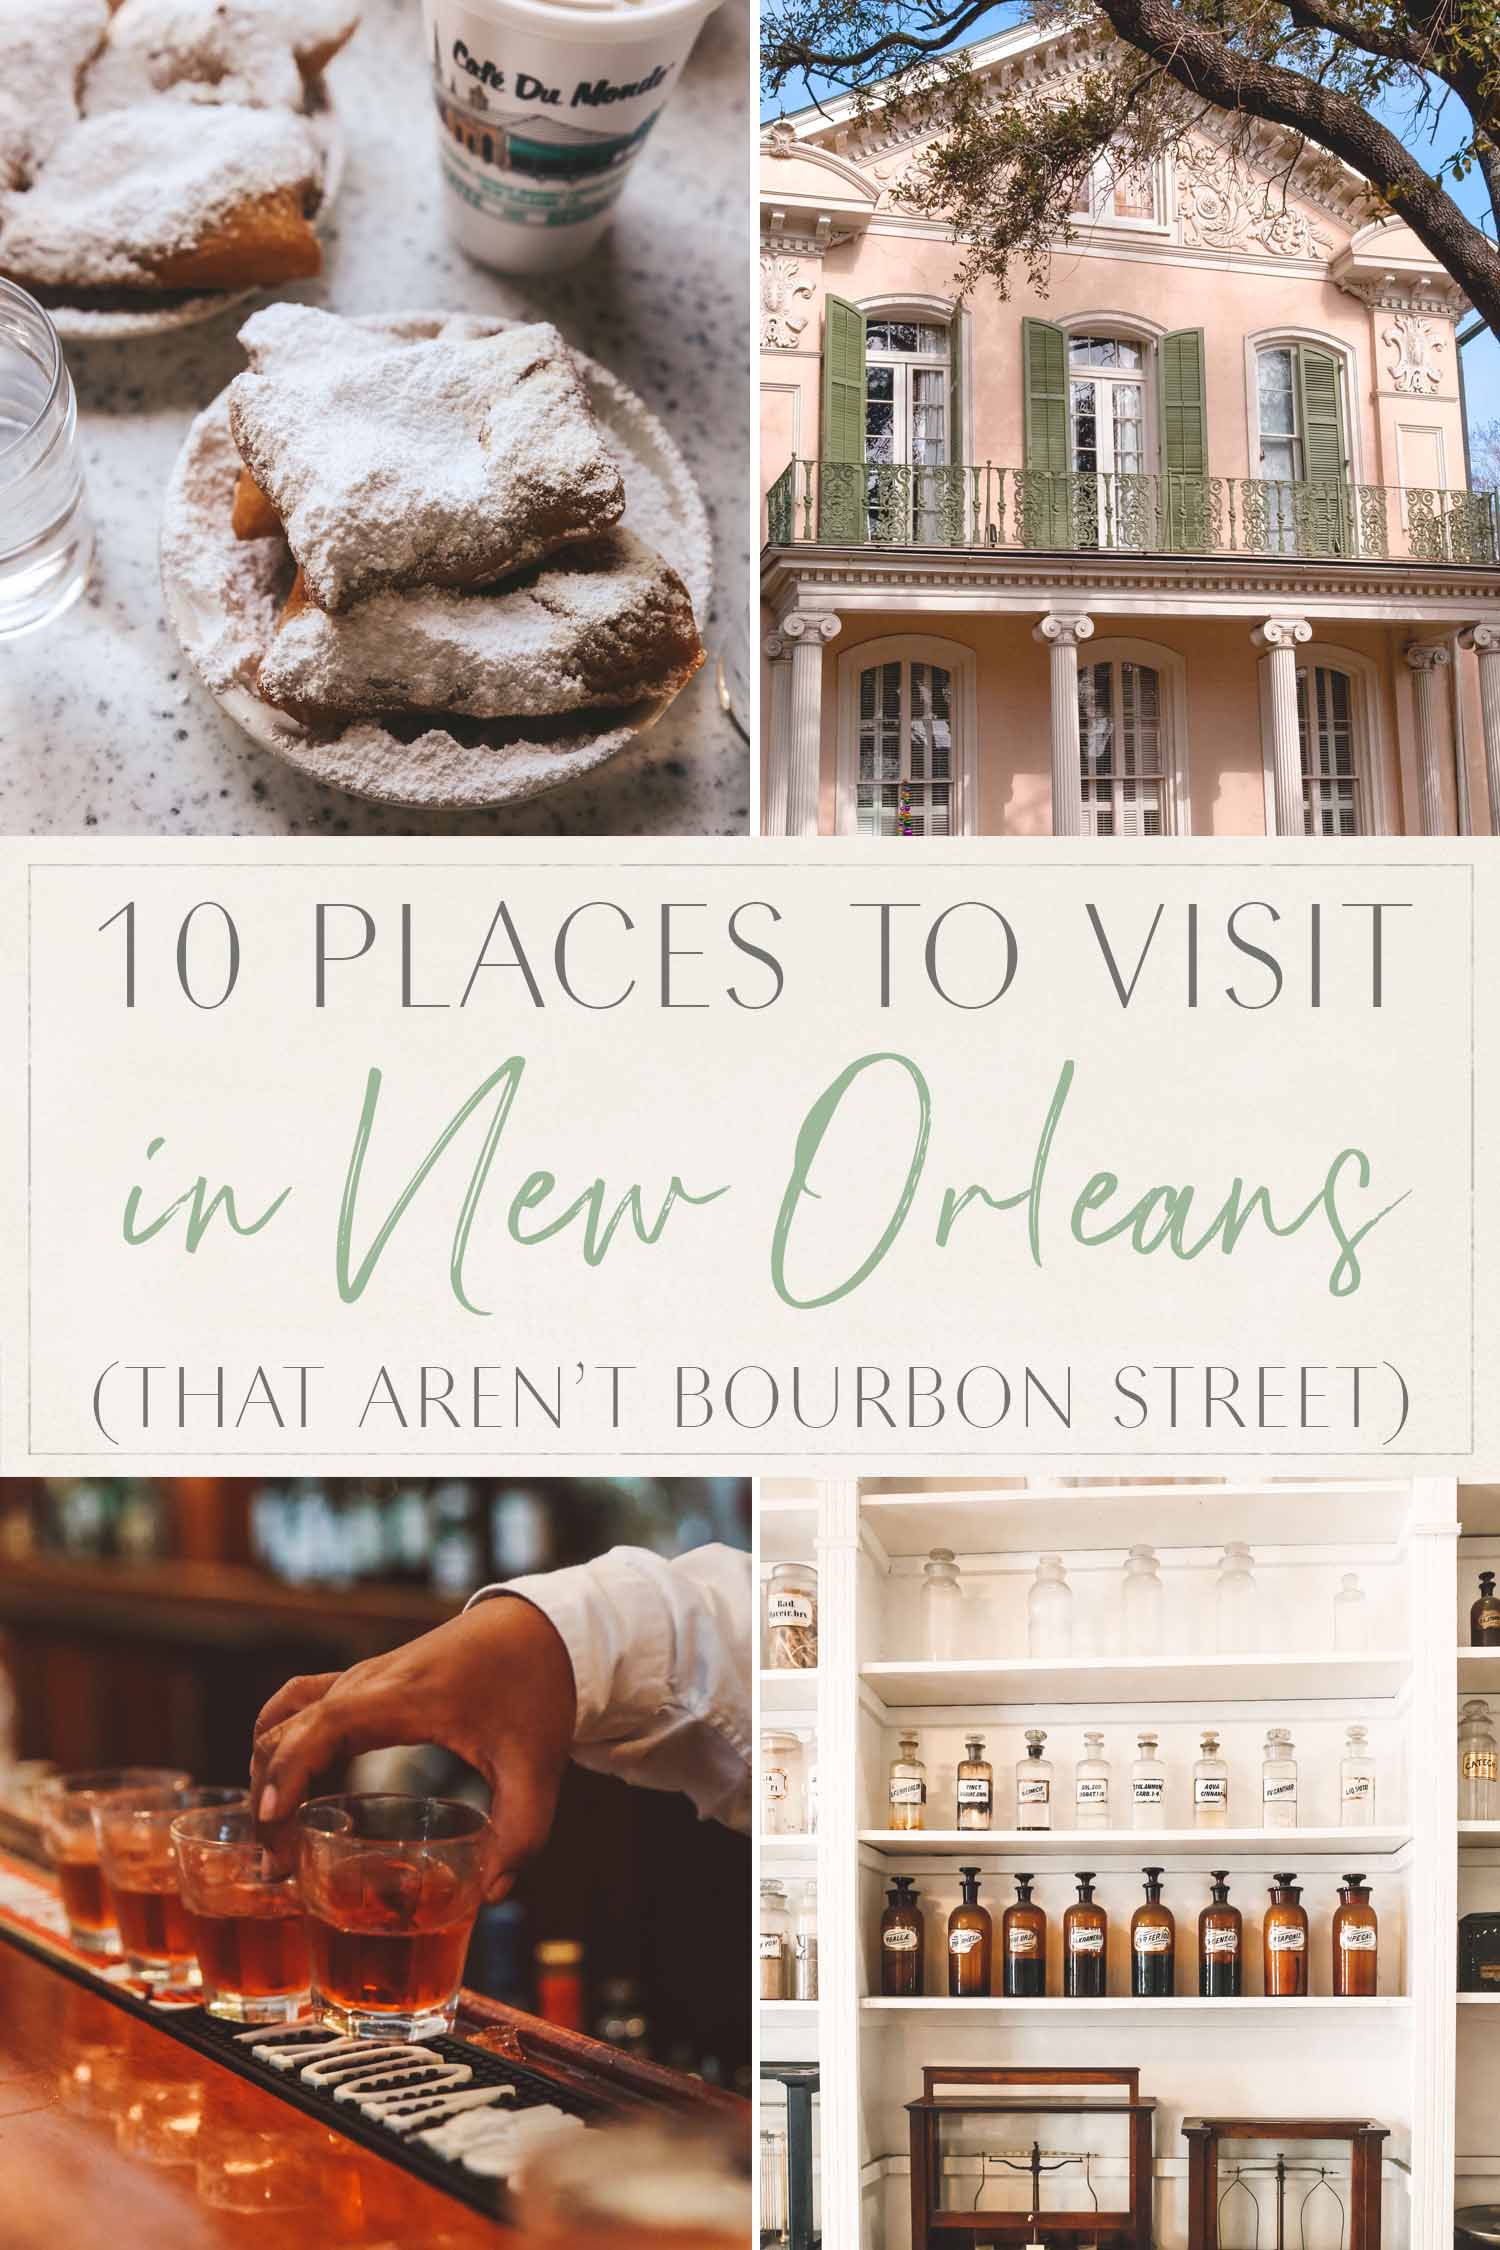 10 Places to Visit in New Orleans Not Bourbon Street